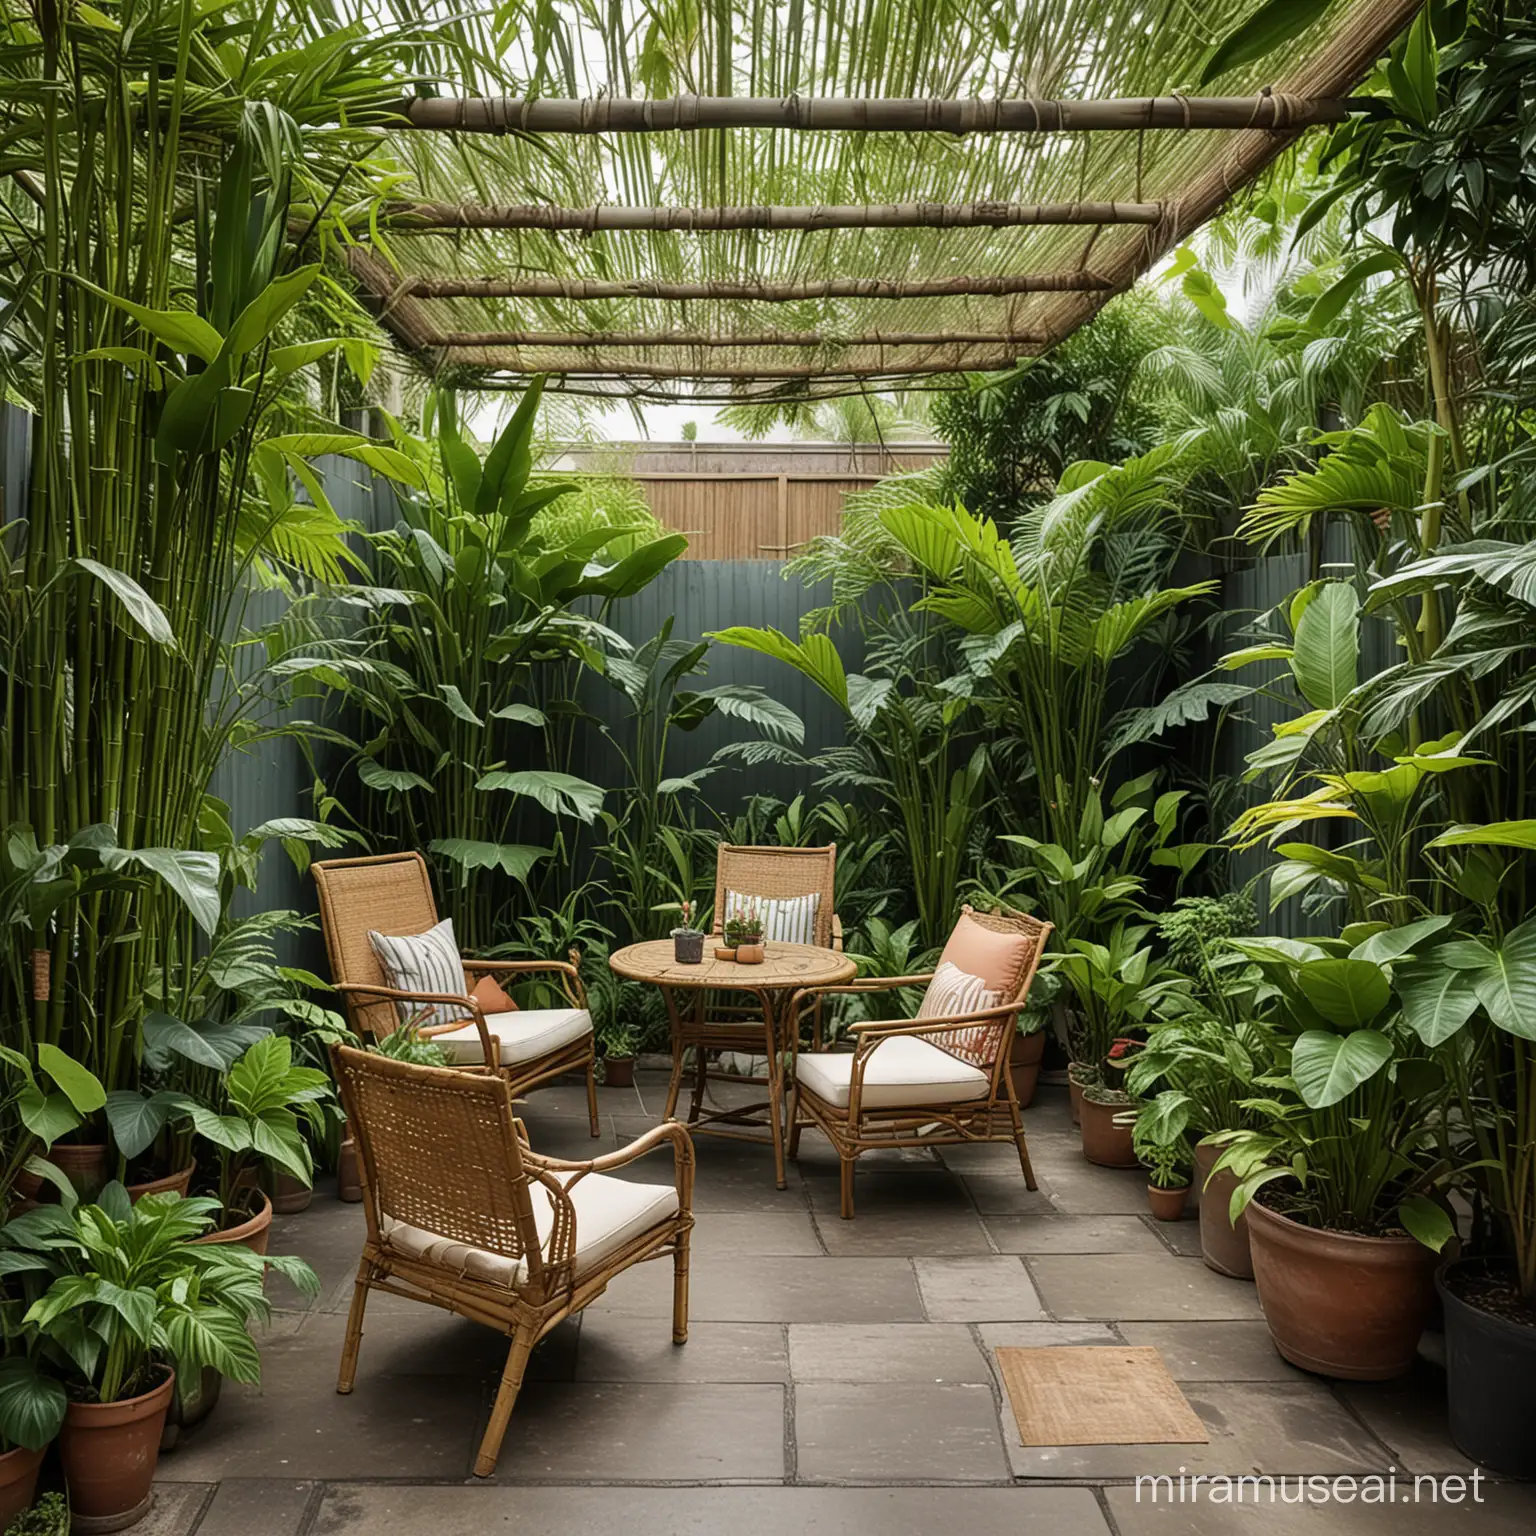 Tropical Oasis Rooftop Garden with Bamboo Fence